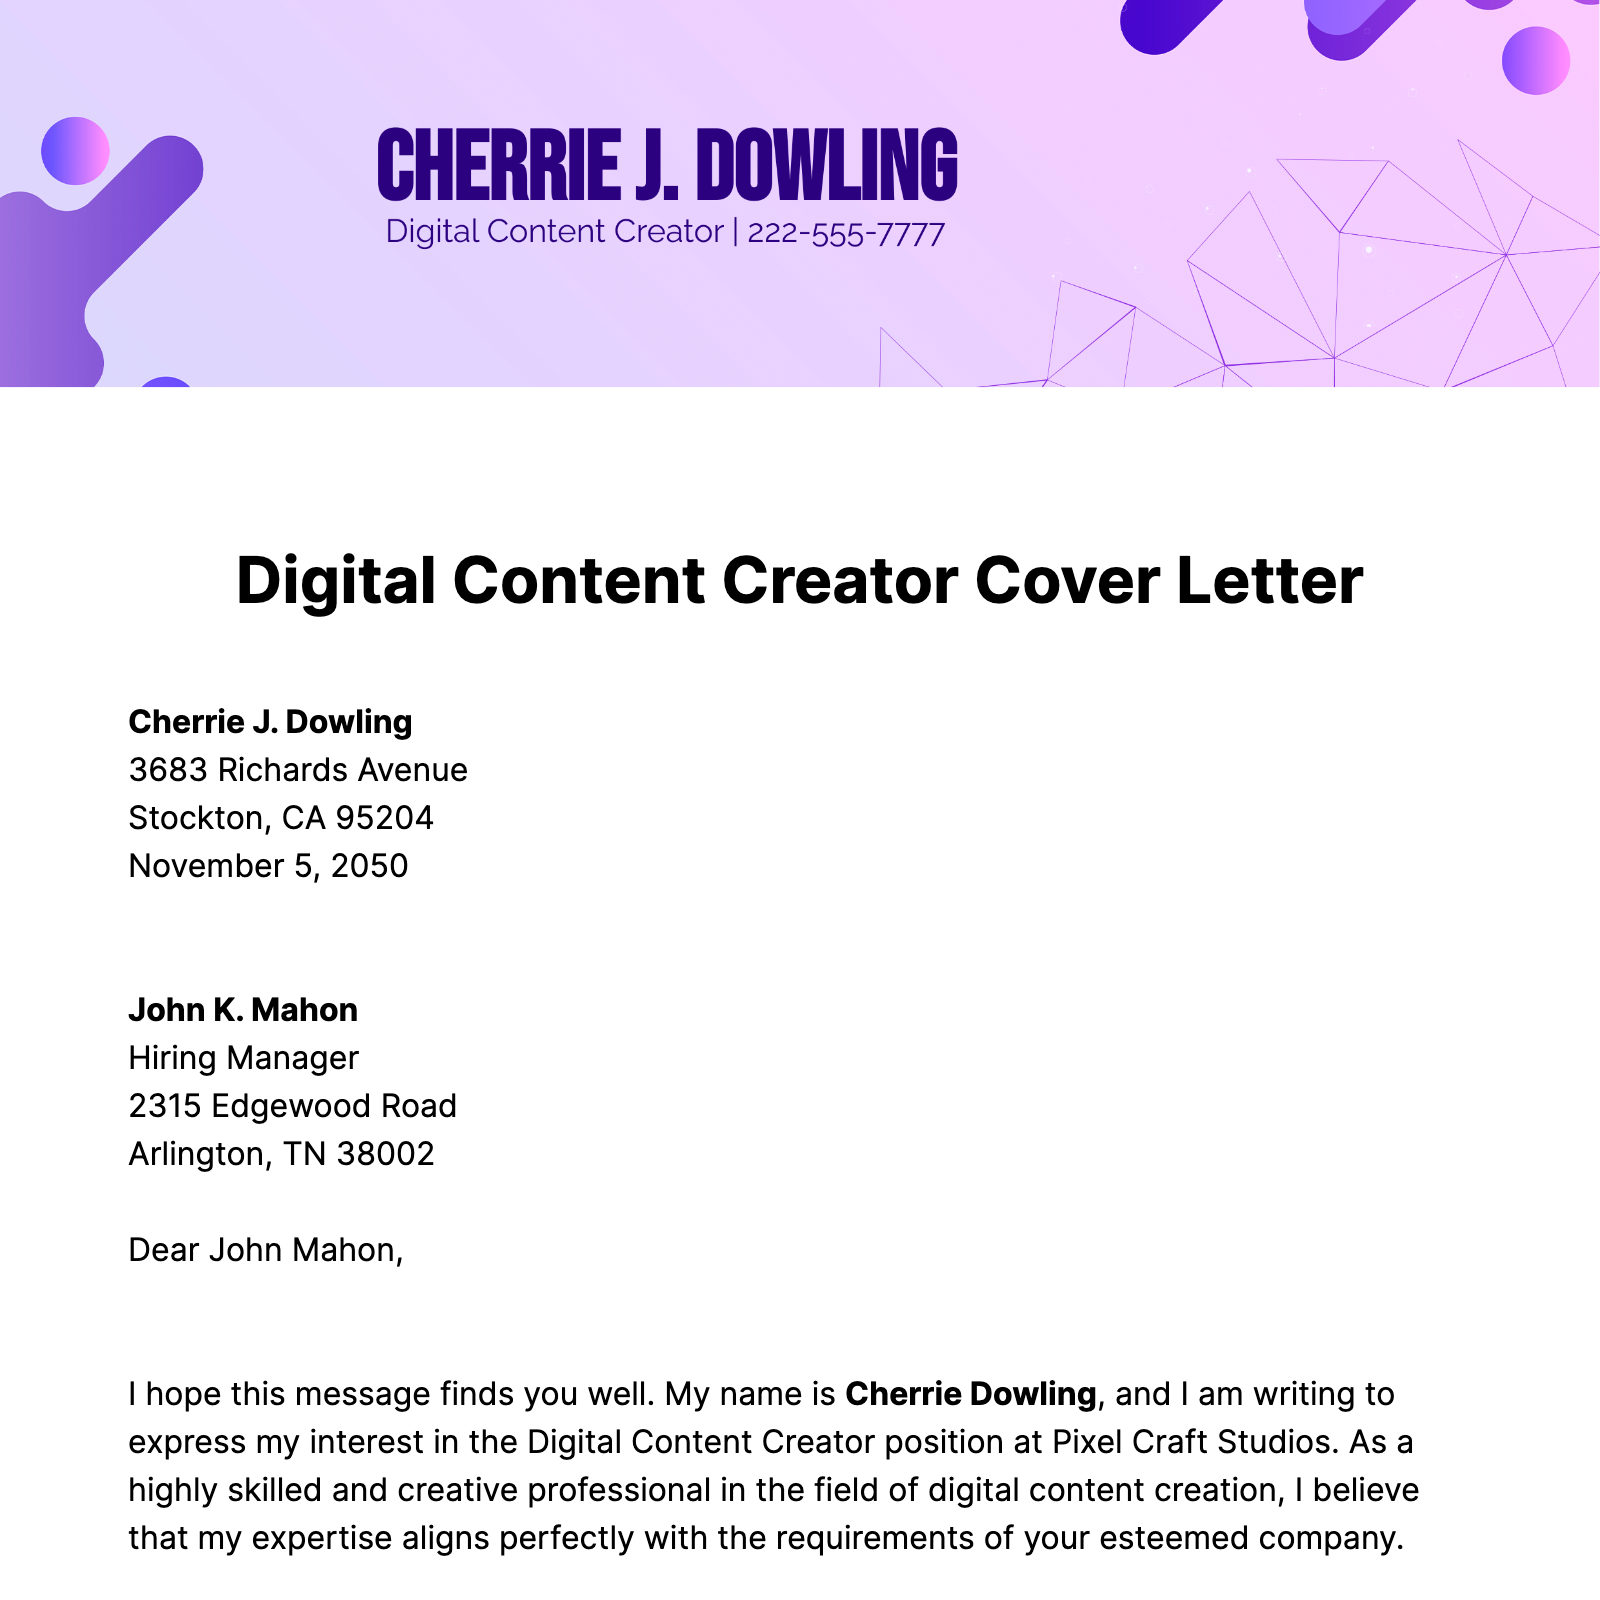 Digital Content Creator Cover Letter  Template